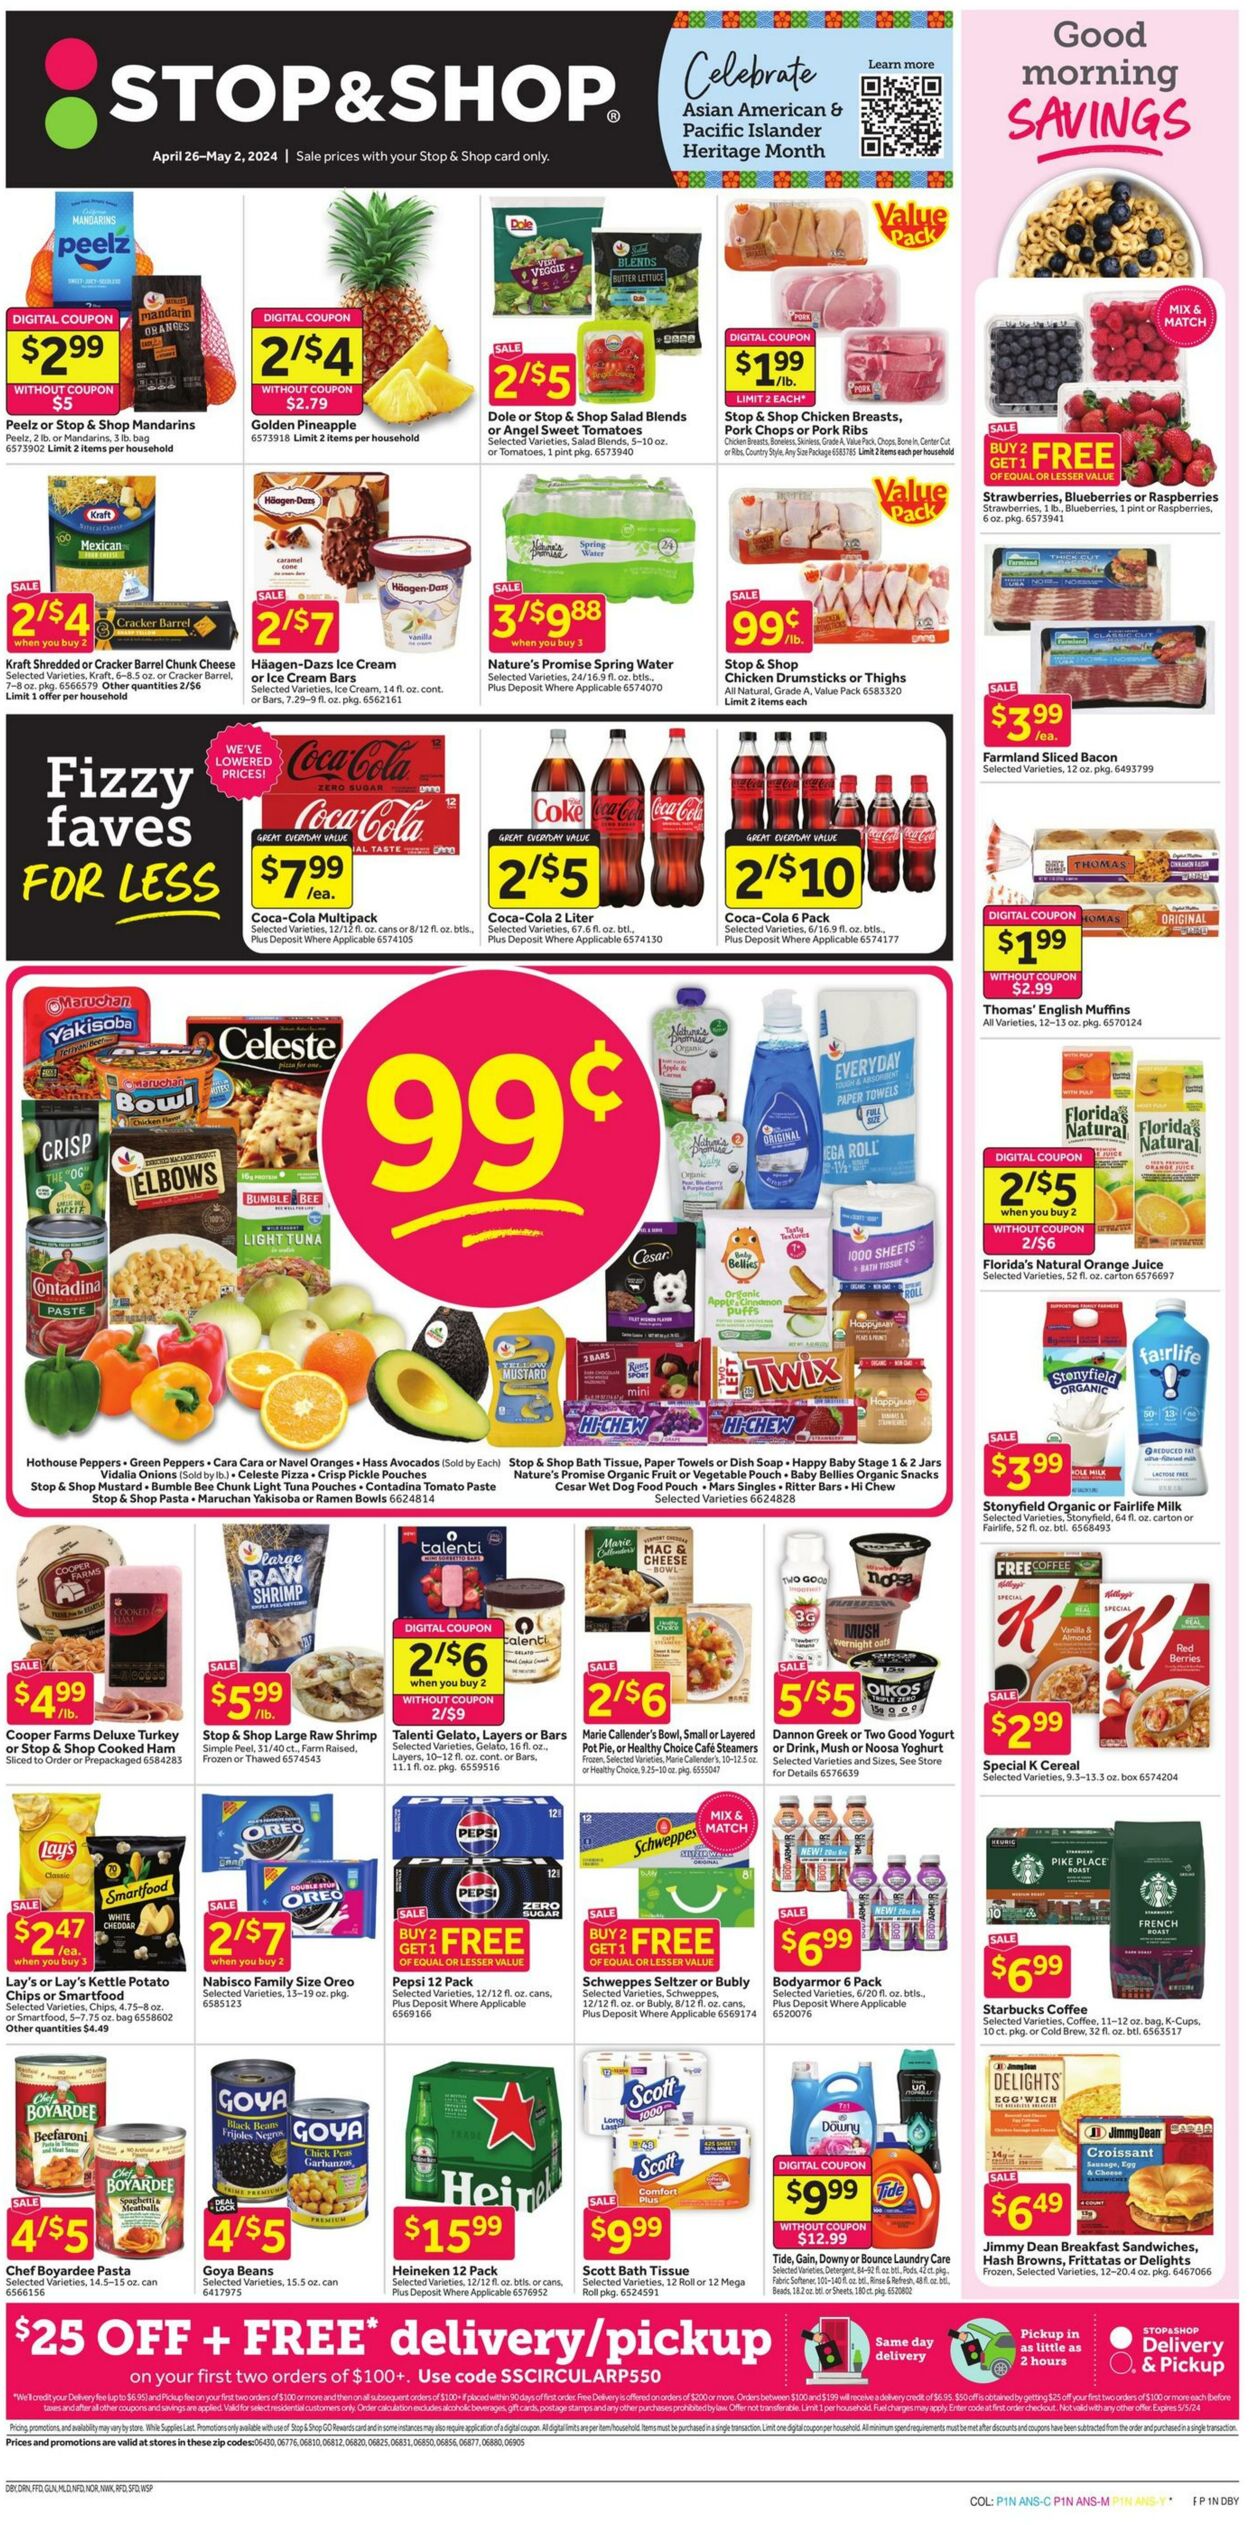 Stop & Shop Promotional weekly ads